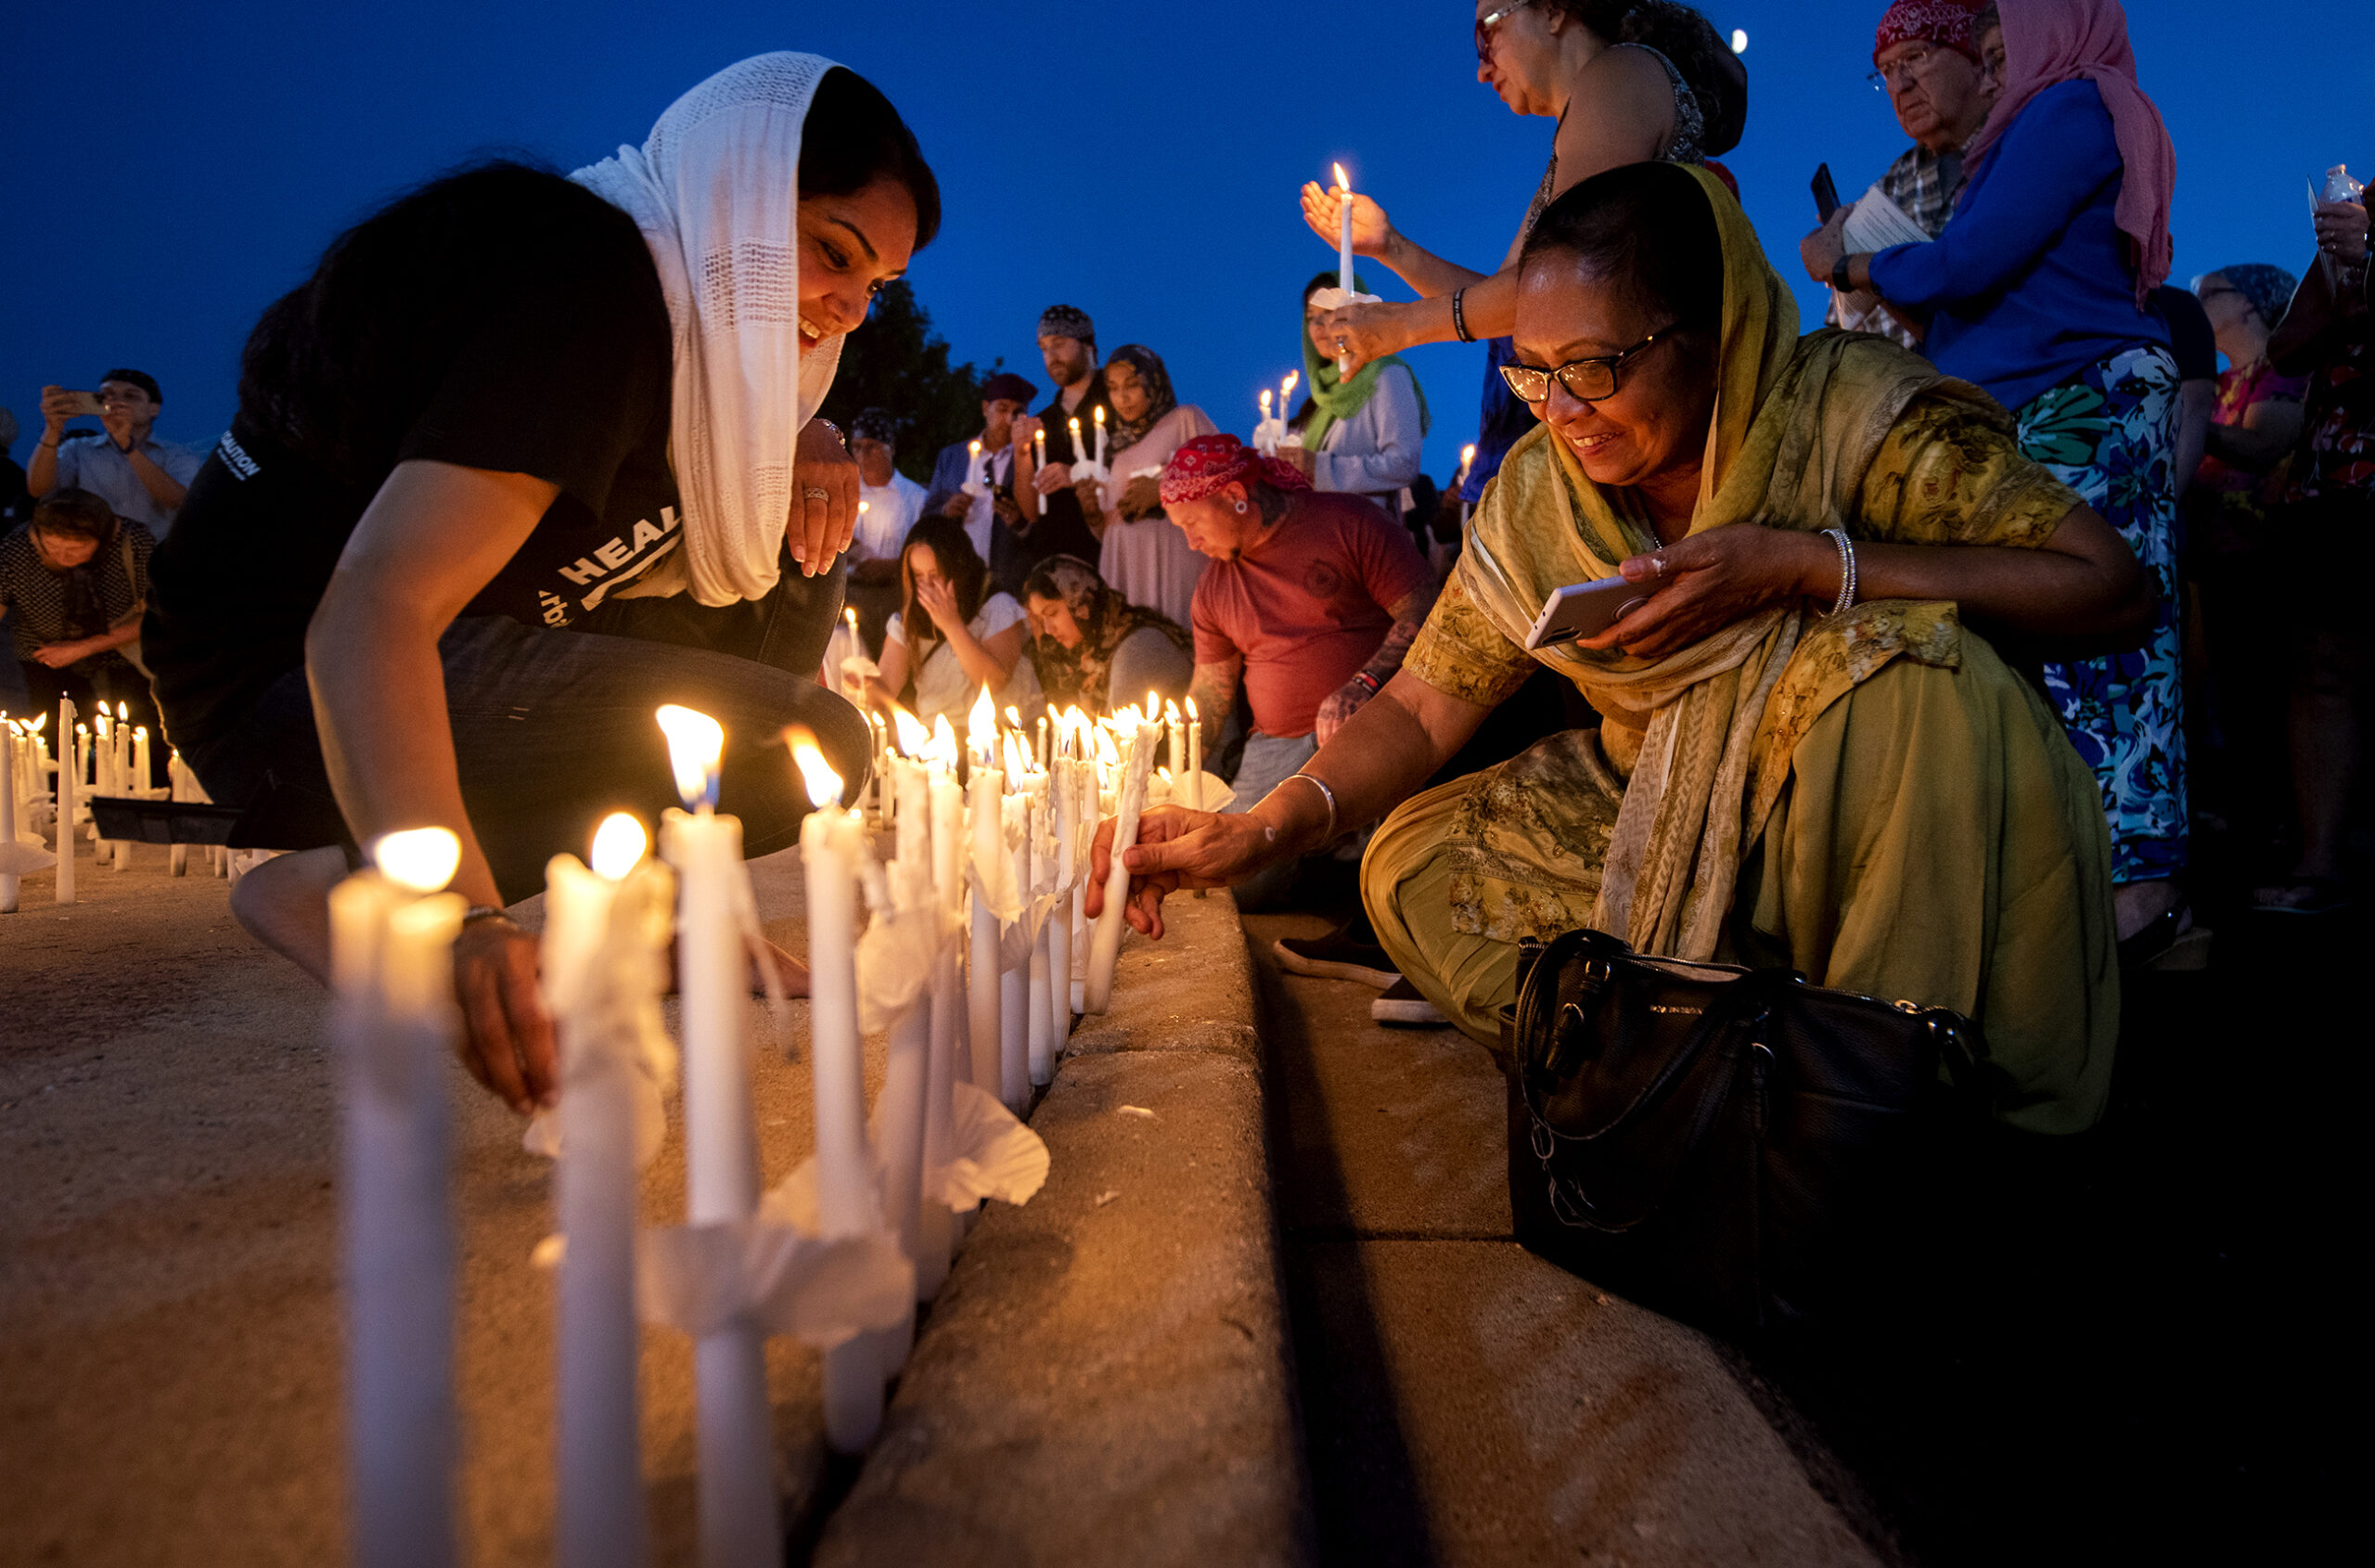 PHOTOS: At candlelight vigil, Sikh Temple of Wisconsin marks 10 years since shooting